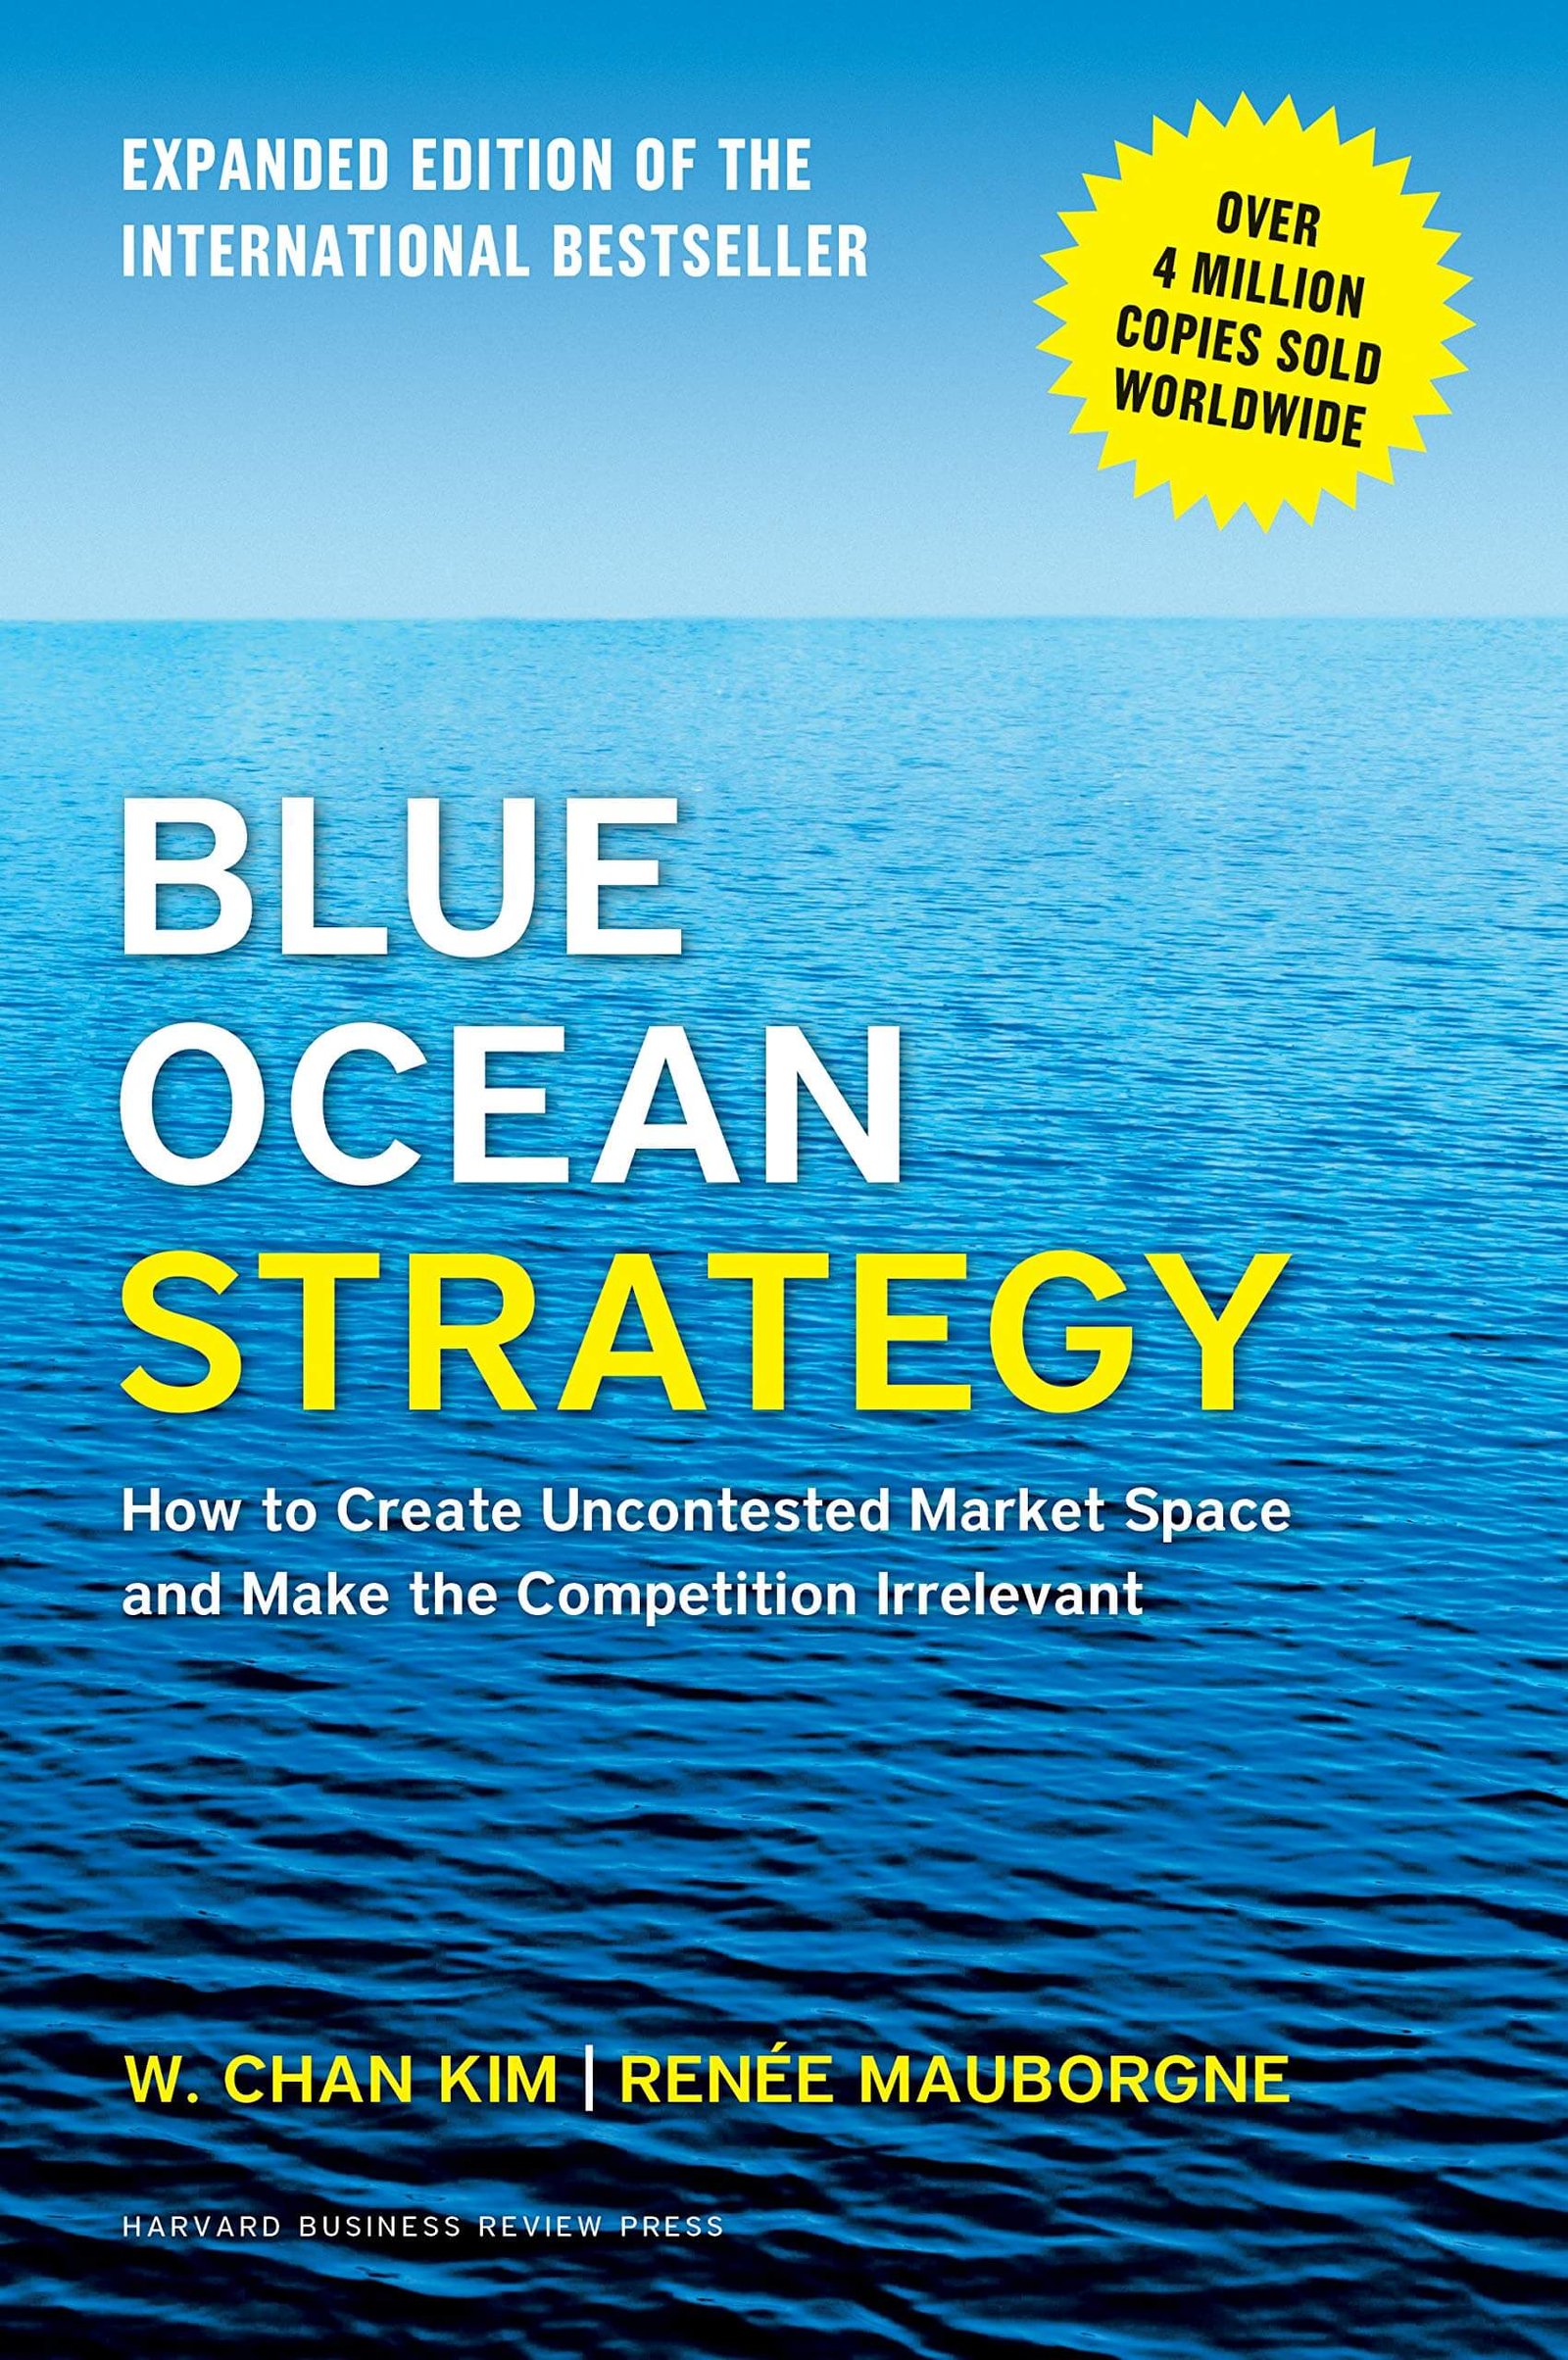 Blue Ocean Strategy: How to Create Uncontested Market Space and Make the Competition Irrelevant by W. Chan Kim and Renée A. Mauborgne